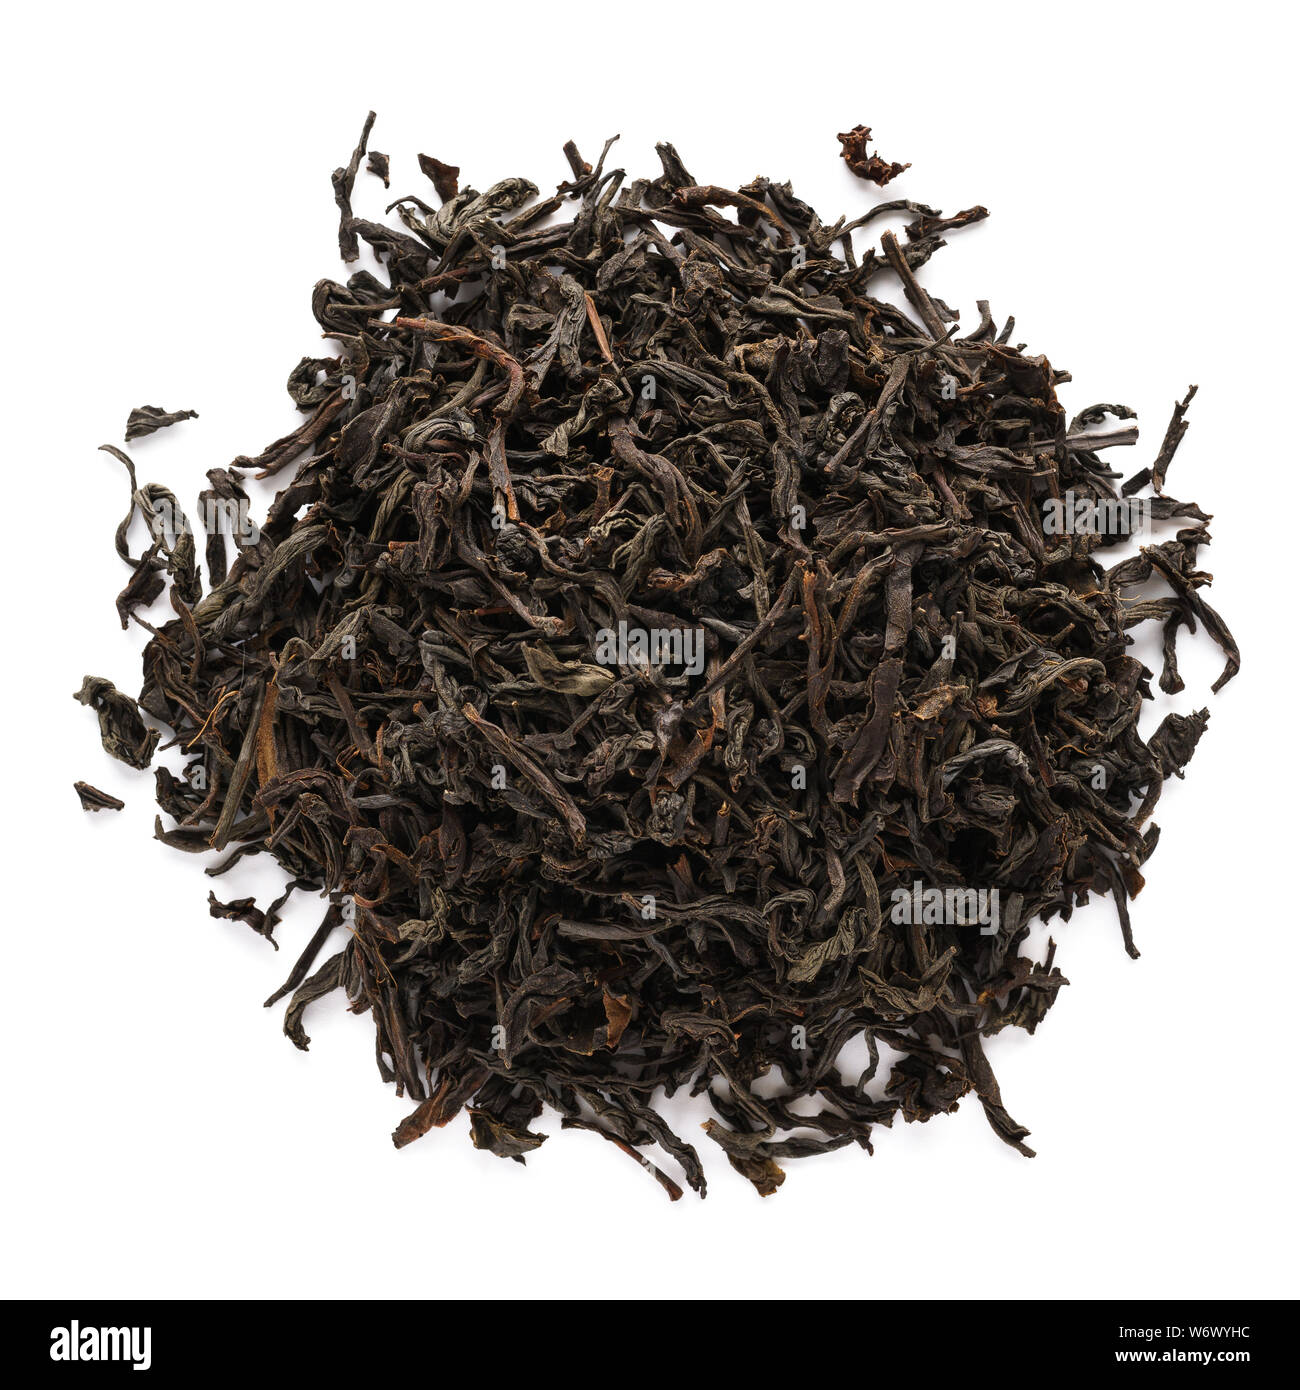 Dry black tea leaves isolated on white background. Top view. Stock Photo